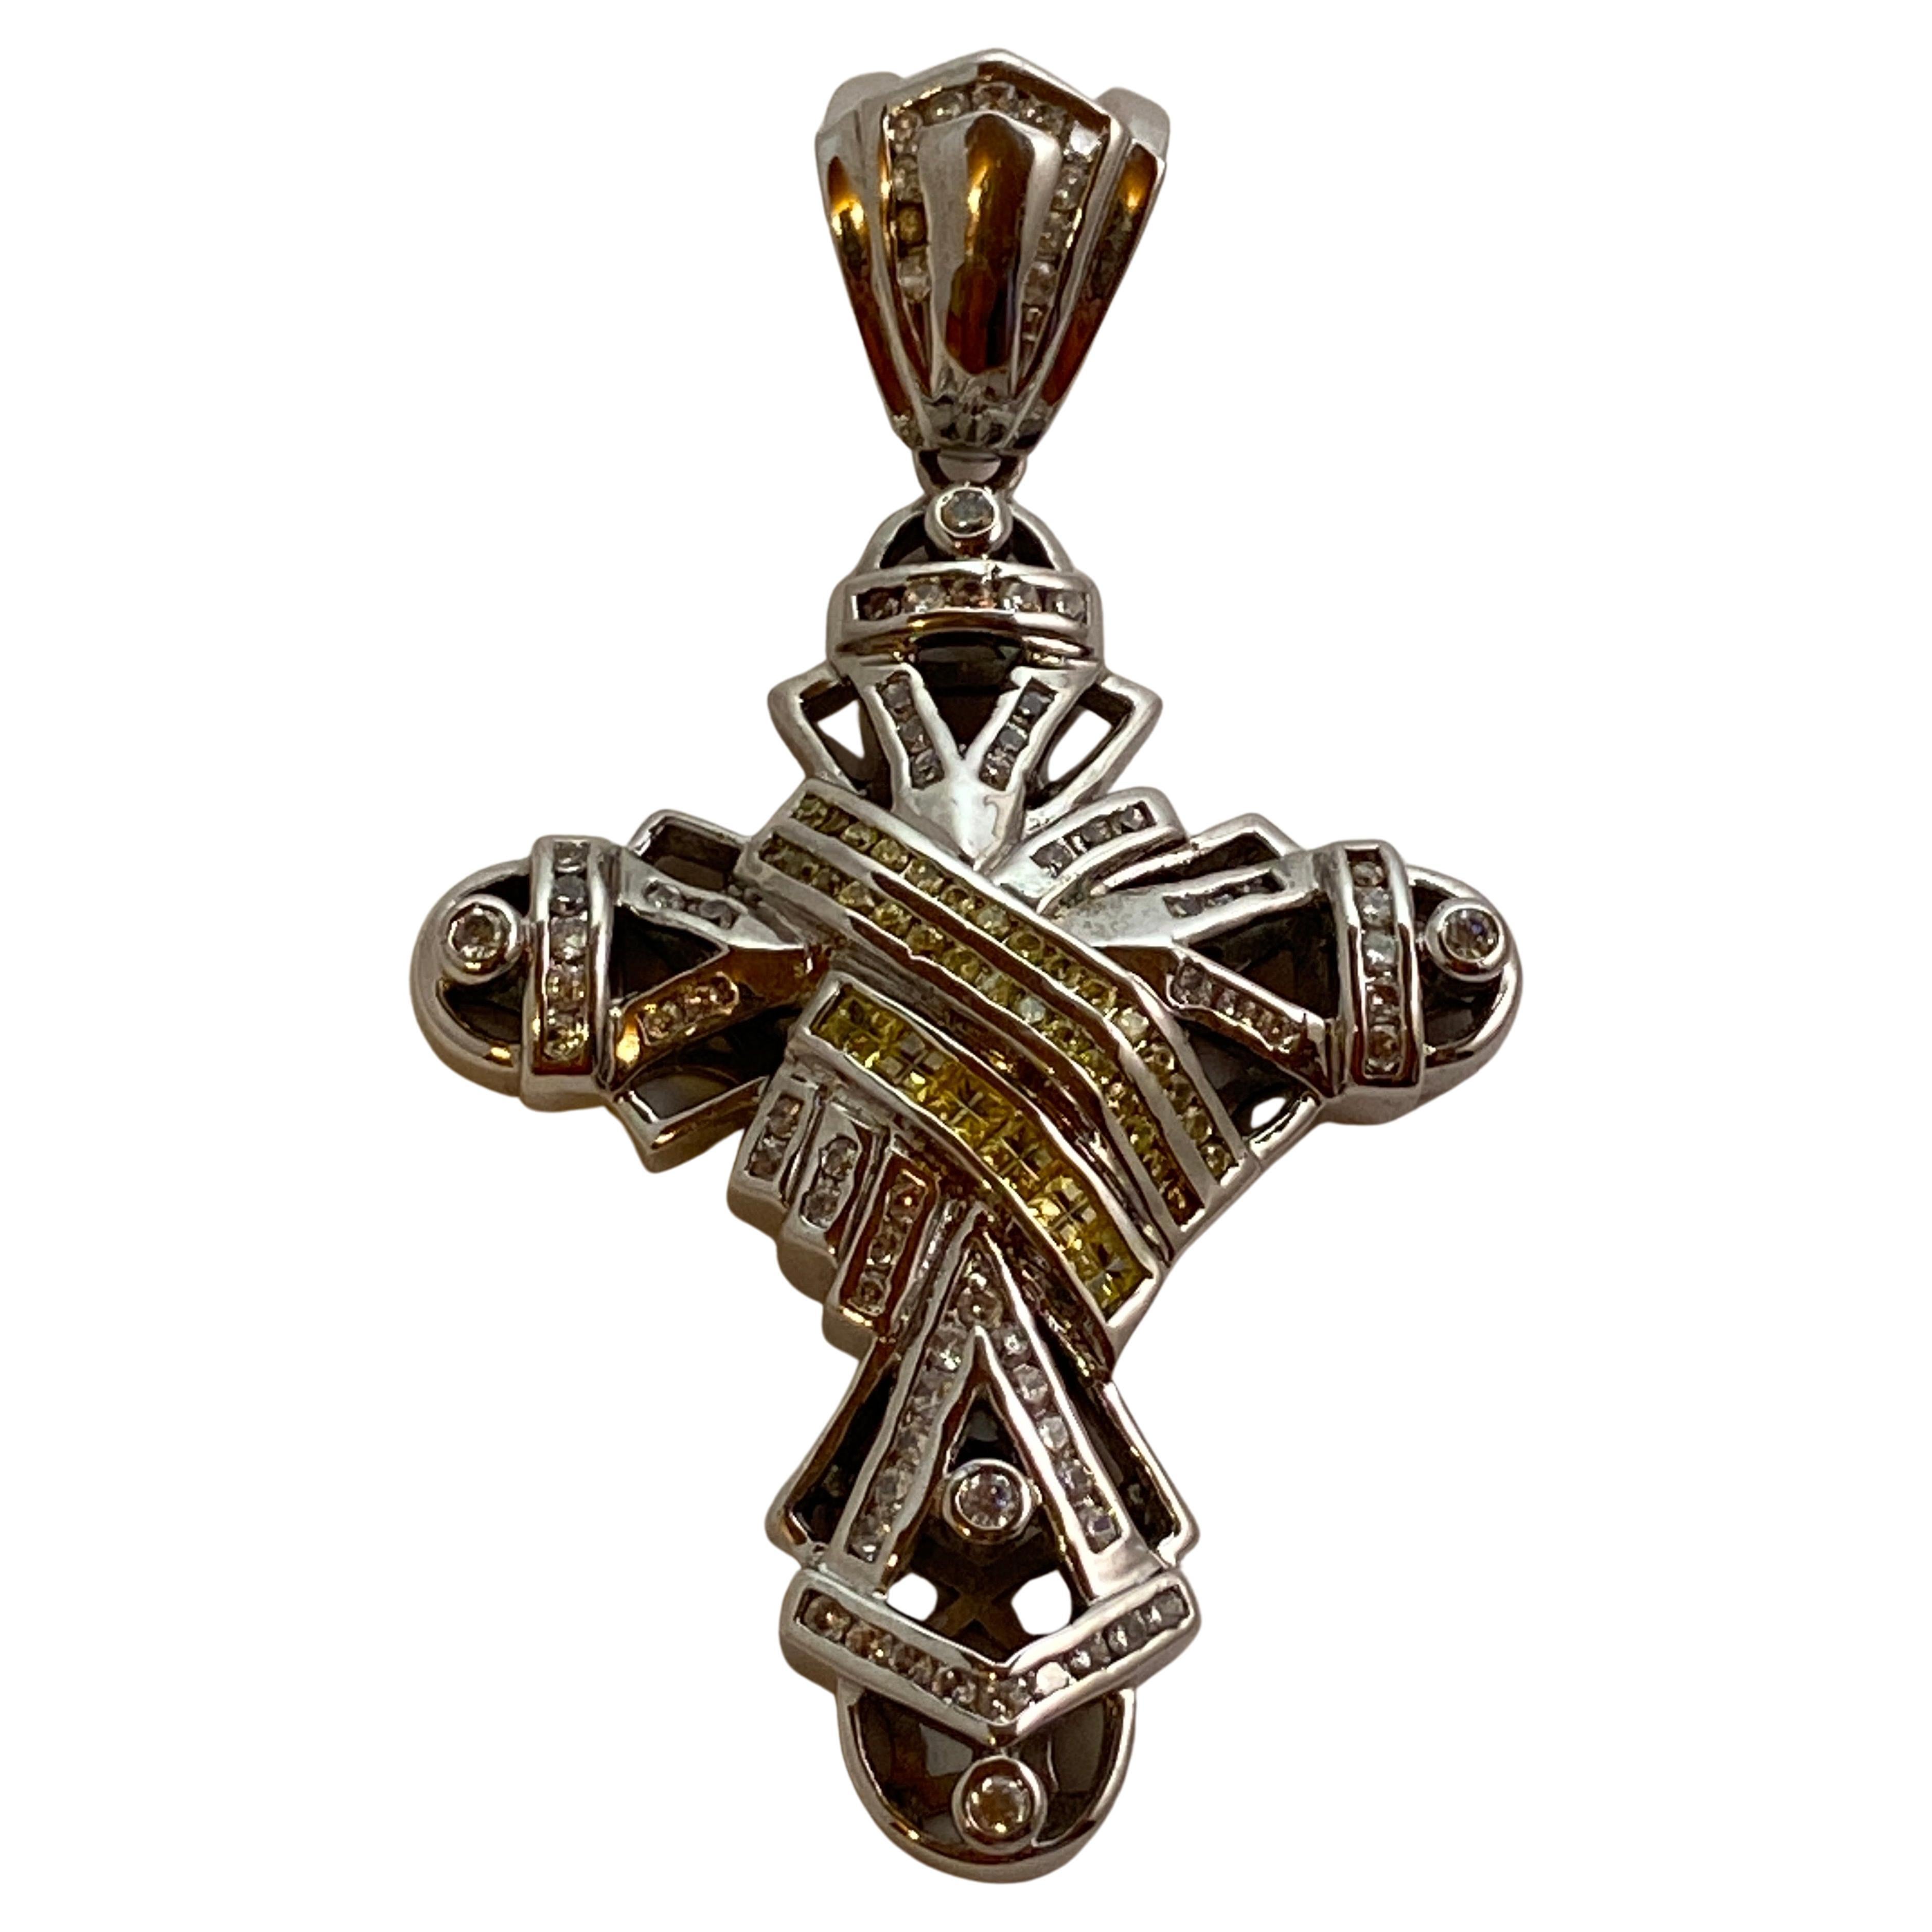 Heavily Plated White Gold Cross Pendant Accented With Semi Precious Stones